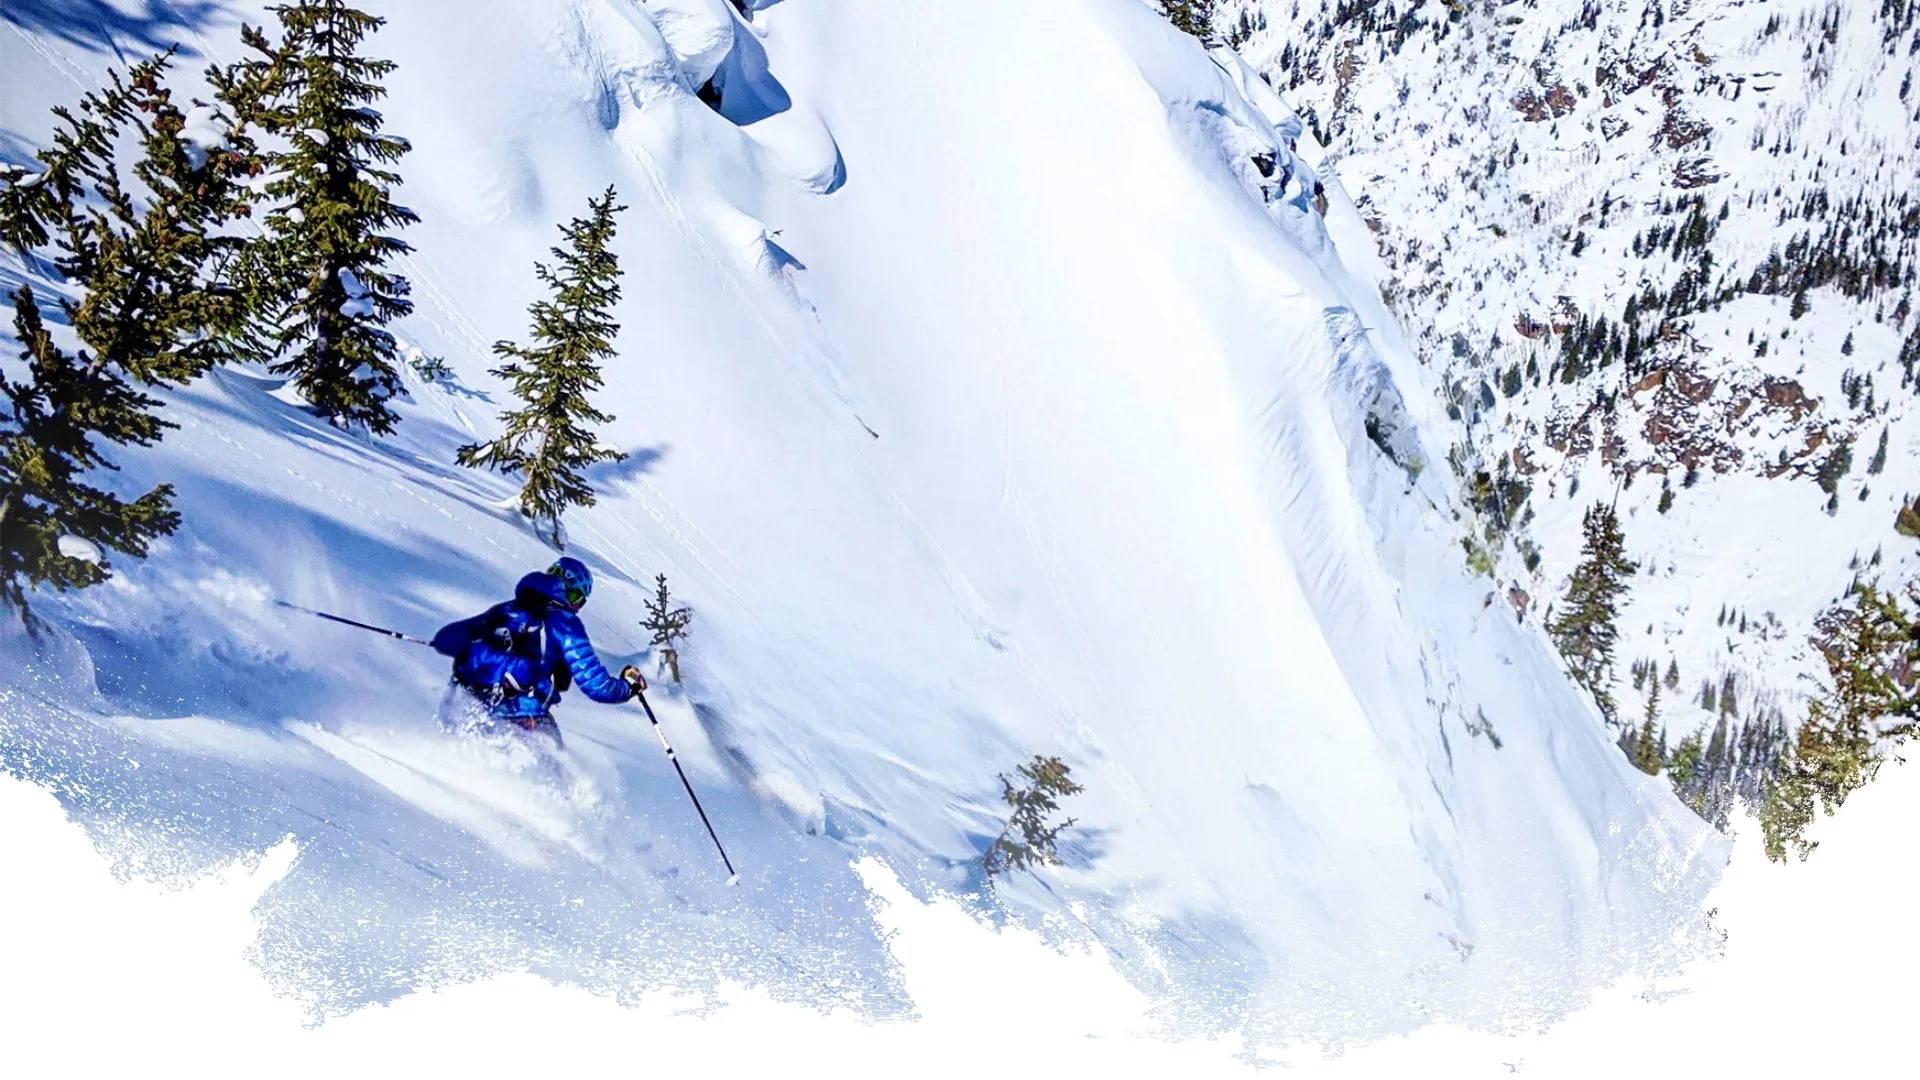 Backcountry skier in blue jacket wearing OutThere backpack